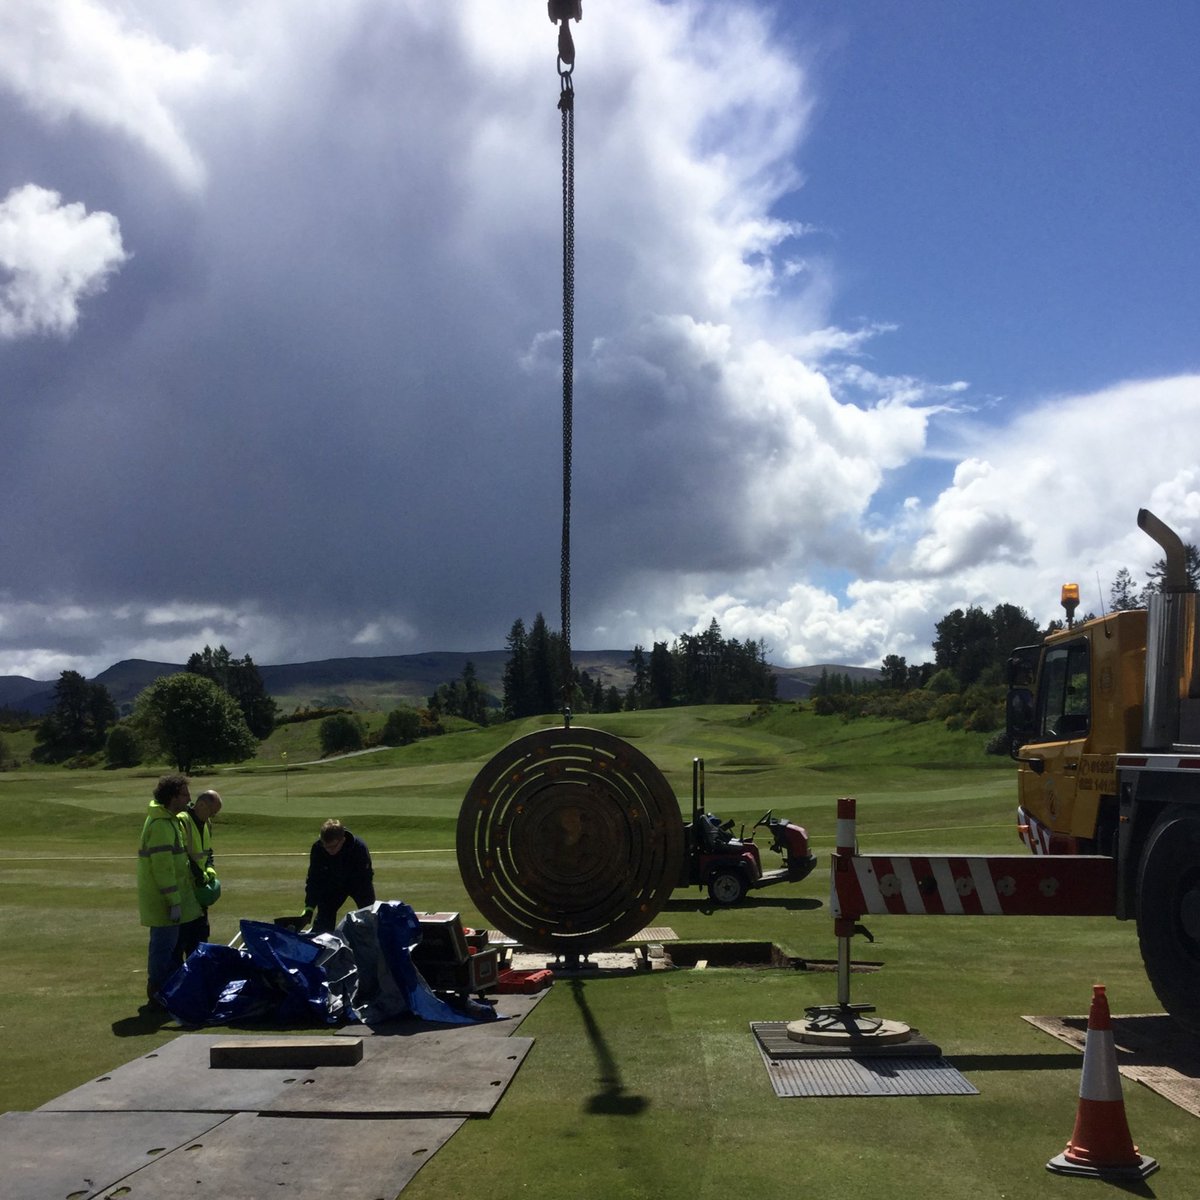 Memories of 2014 Gleneagles #Rydercup & the making of a sculpture on the 18th hole to celebrate the great event.